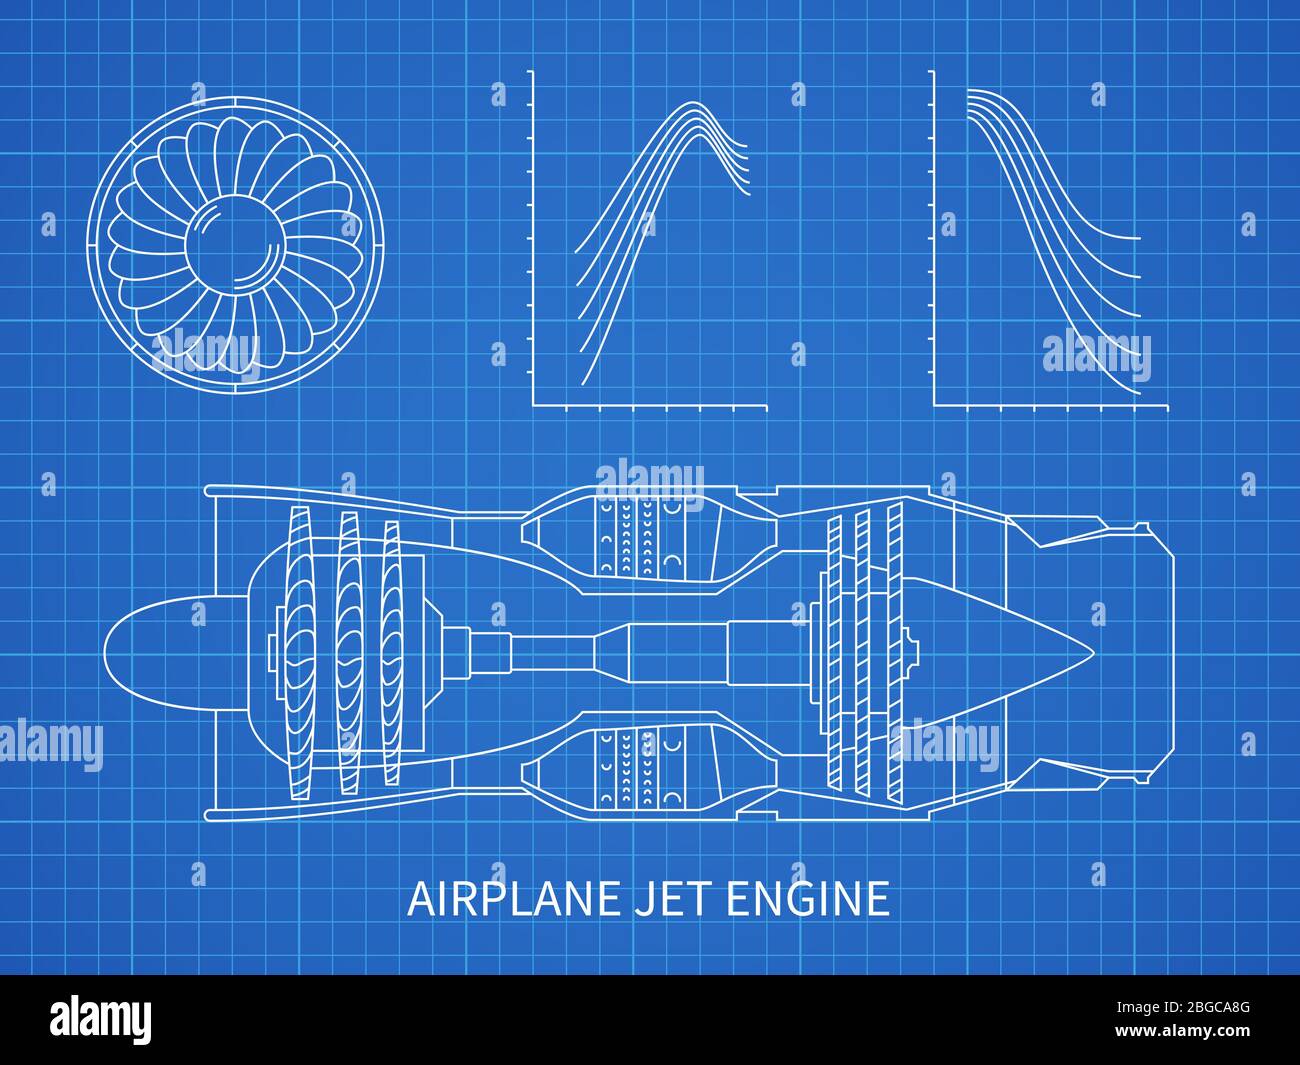 Airplane jet engine with turbine vector blueprint design. Illustration of air engine and turbine plan drawing blueprint Stock Vector